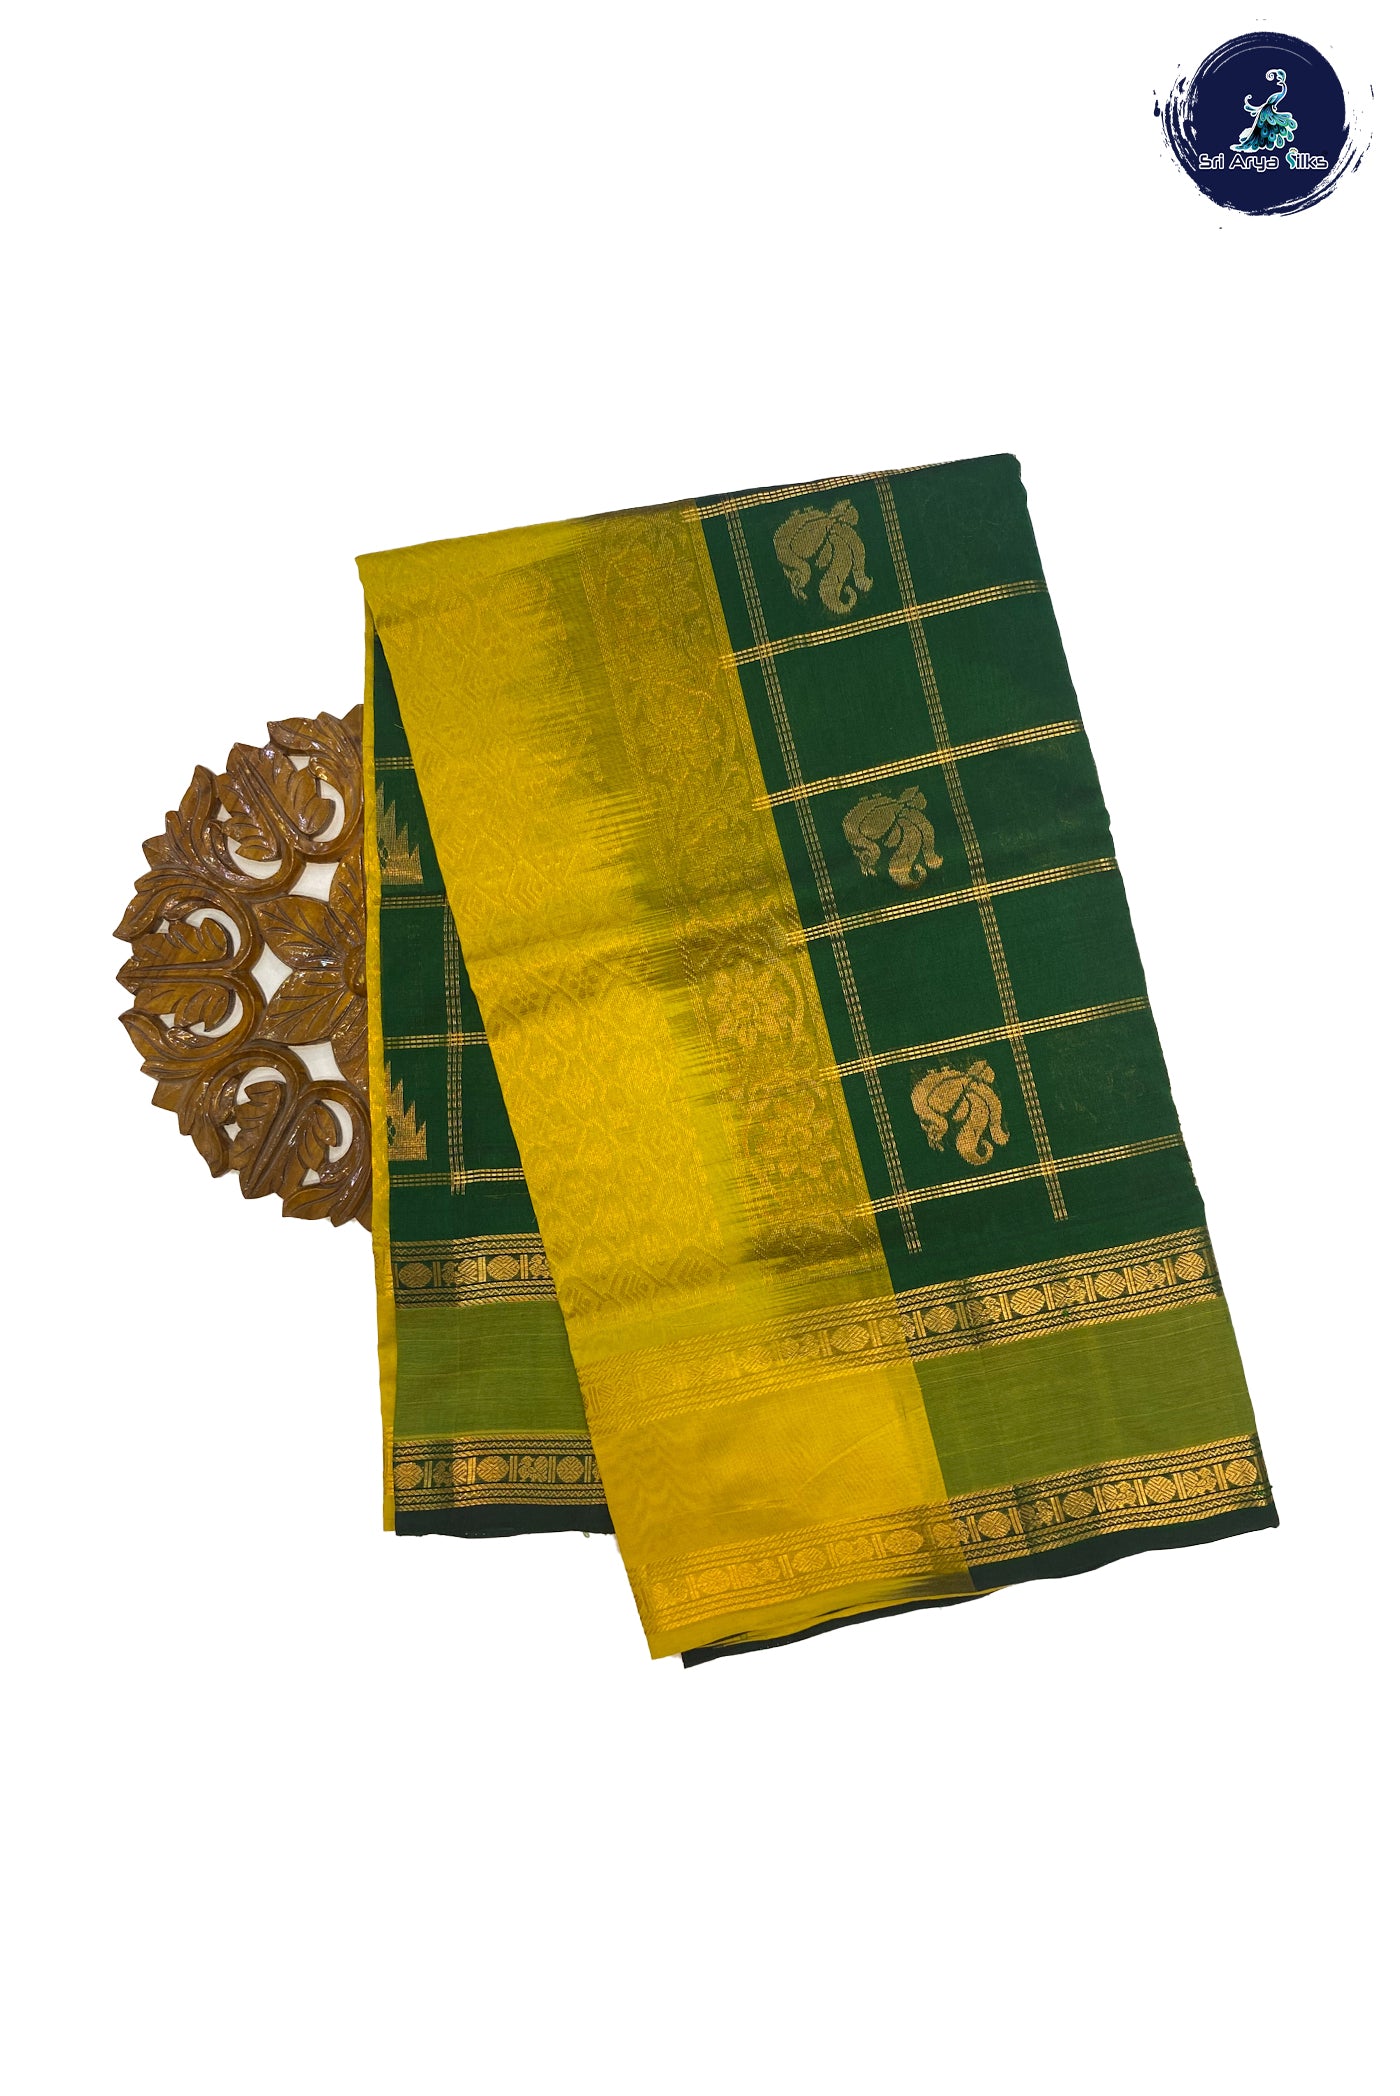 Firefly Saree Contours in Coimbatore at best price by Paavay Saree Contours  - Justdial